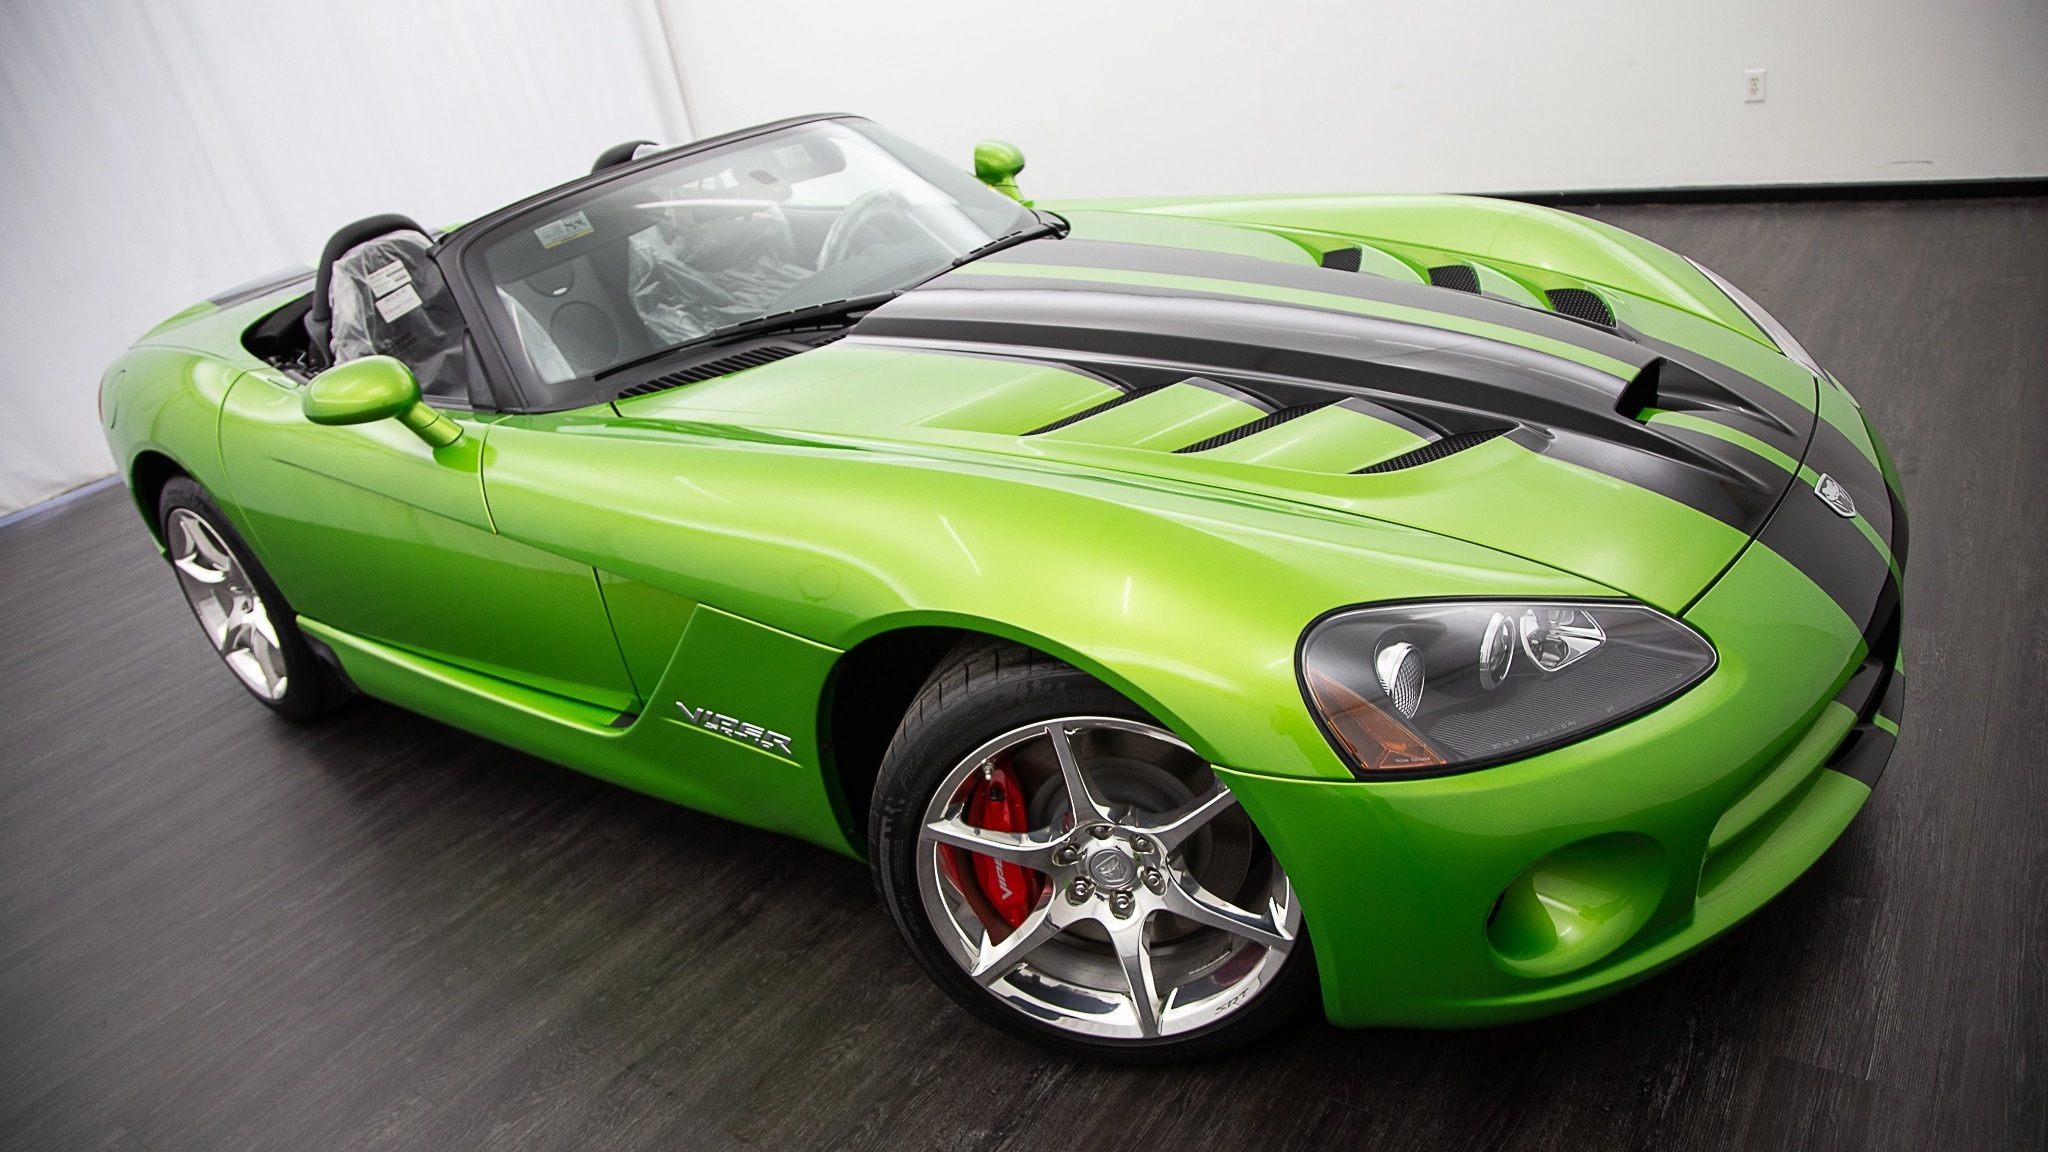 This 2010 Dodge Viper SRT-10 Roadster With 8-Miles On The Odometer Went For  Over $200K! - MoparInsiders